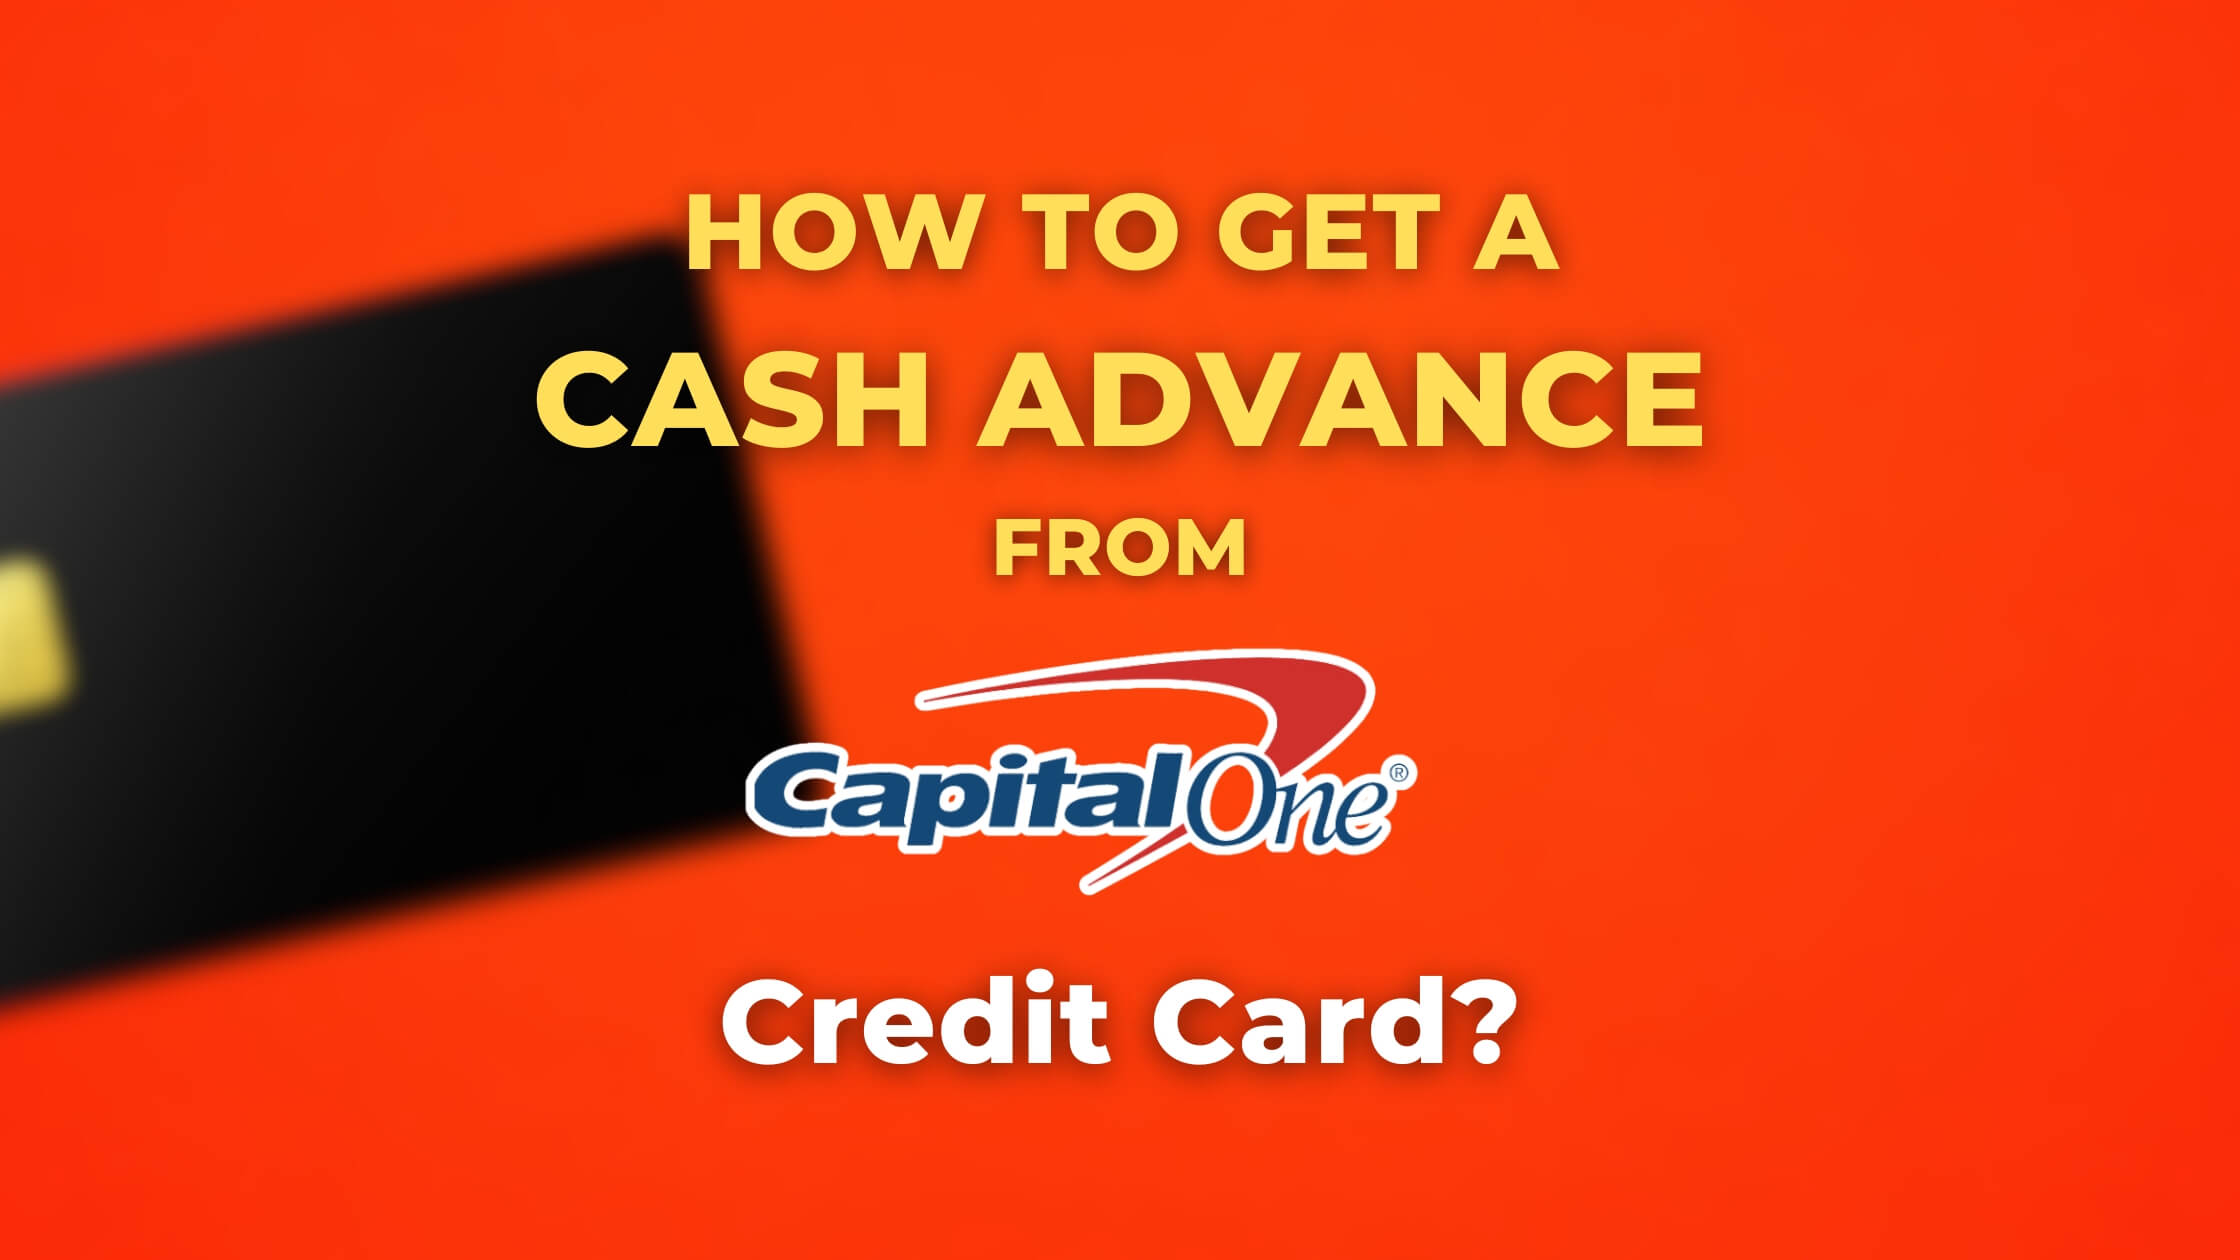 How to Get a Cash Advance from Capital One Credit Card